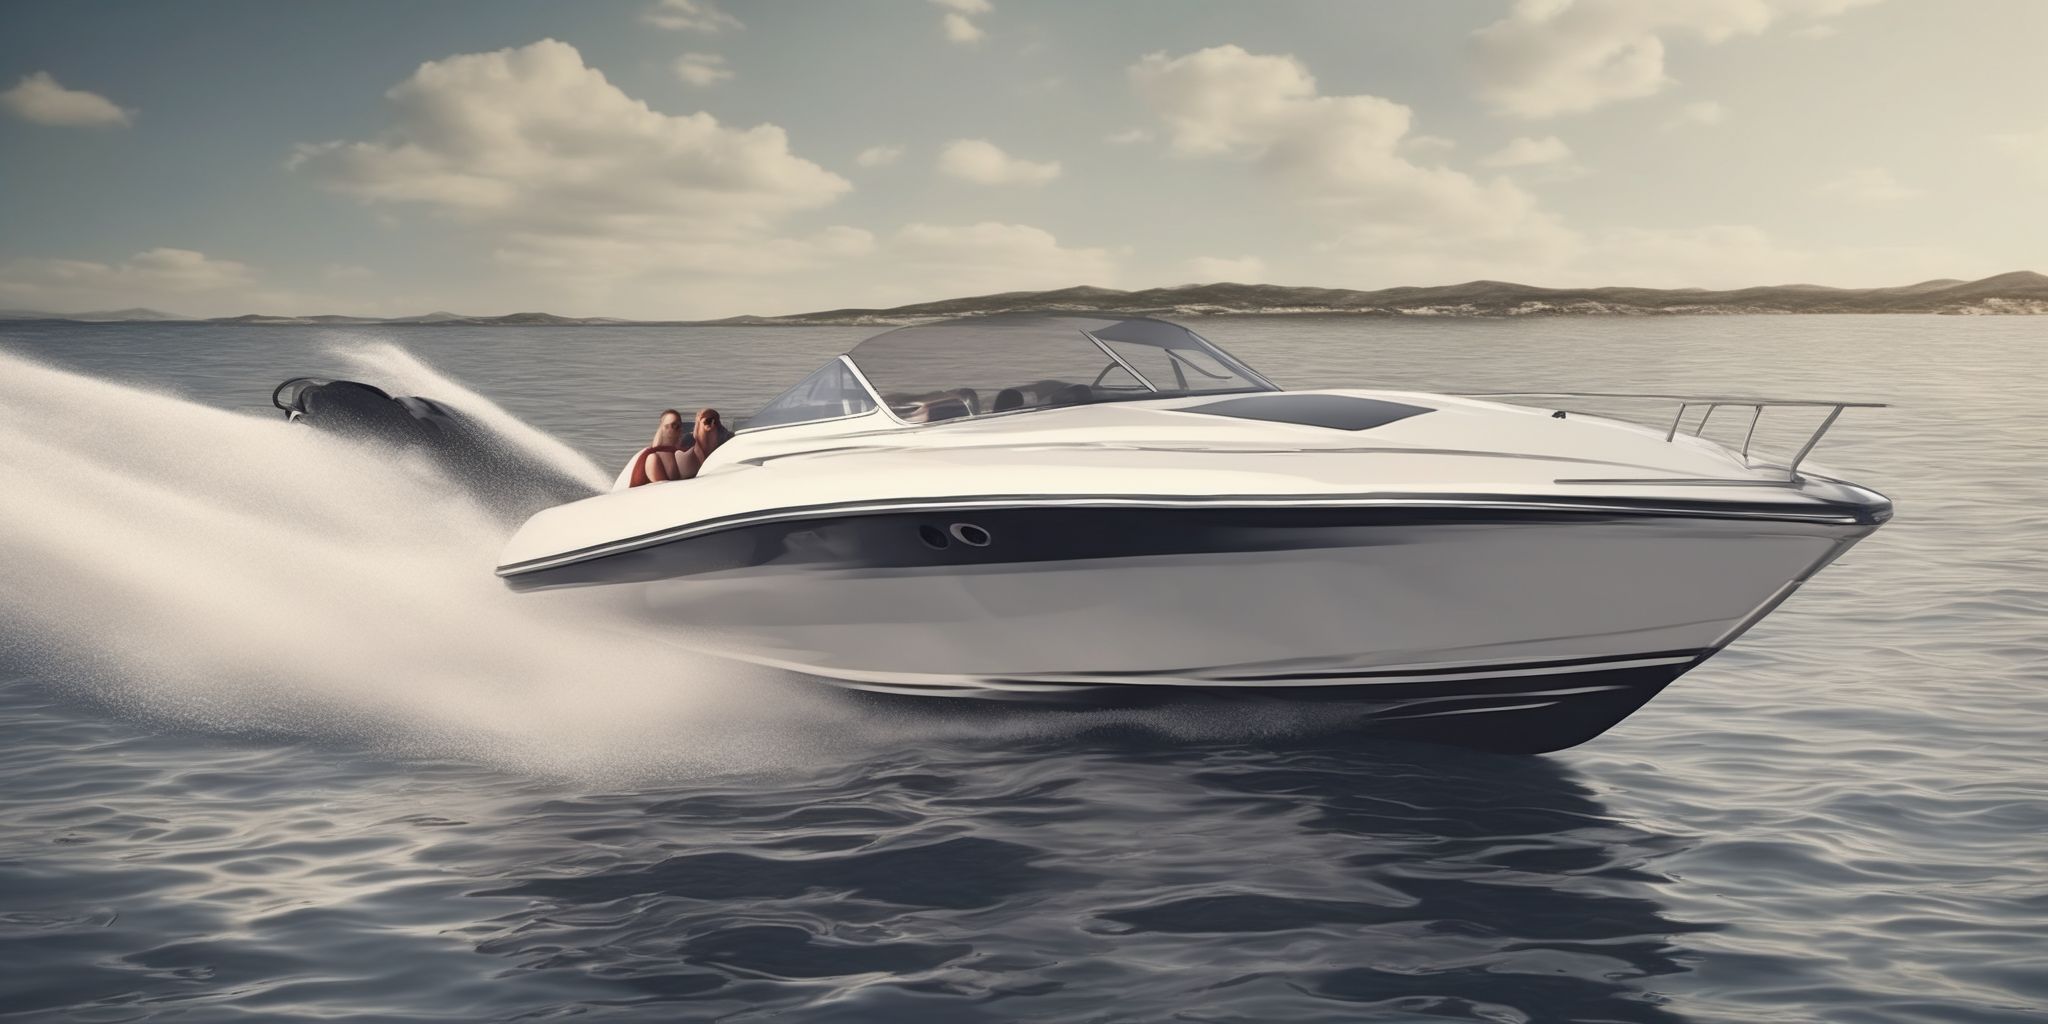 Speedboat  in realistic, photographic style